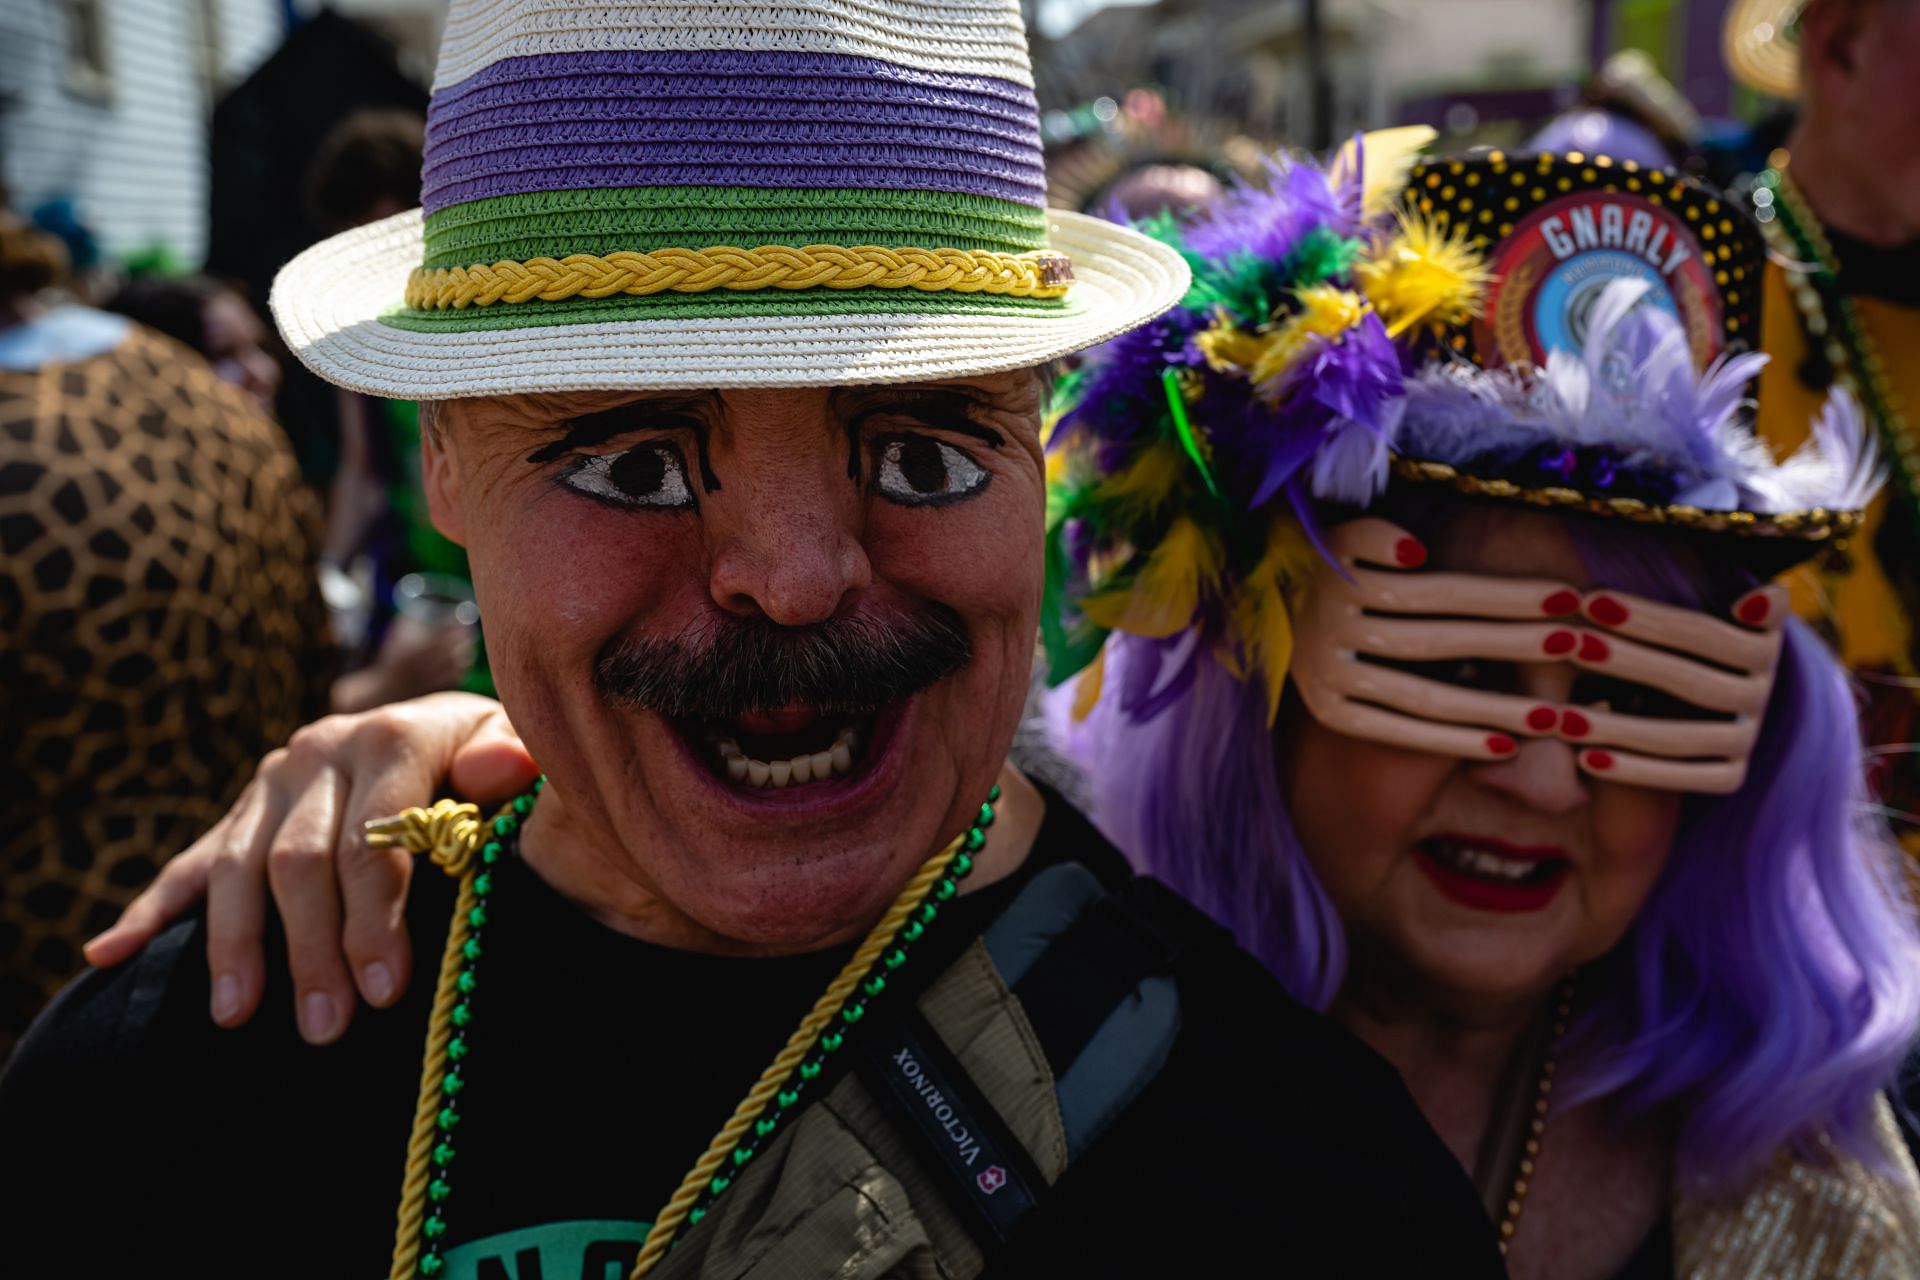 Revelers Turn Out For Annual New Orleans Mardi Gras Celebration